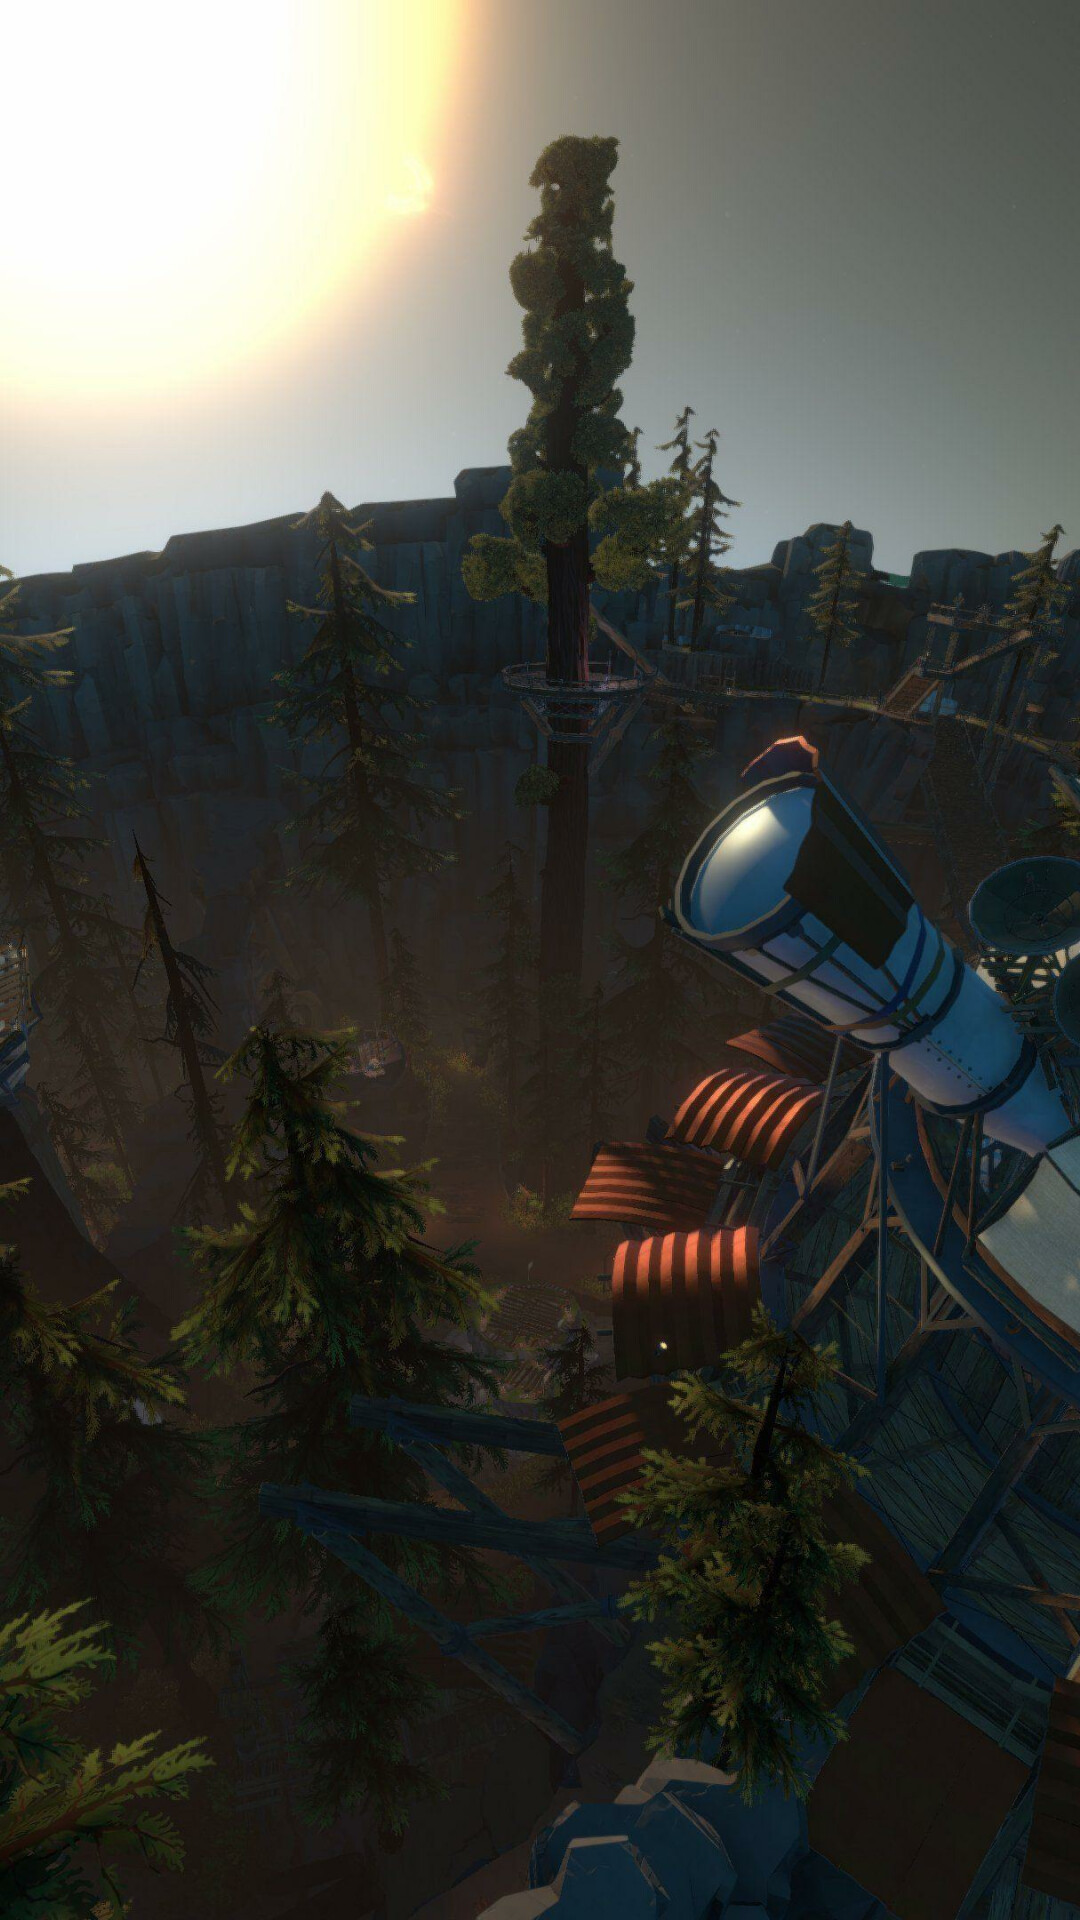 Outer Wilds: Science fiction, Action game, Directed by Alex Beachum. 1080x1920 Full HD Wallpaper.